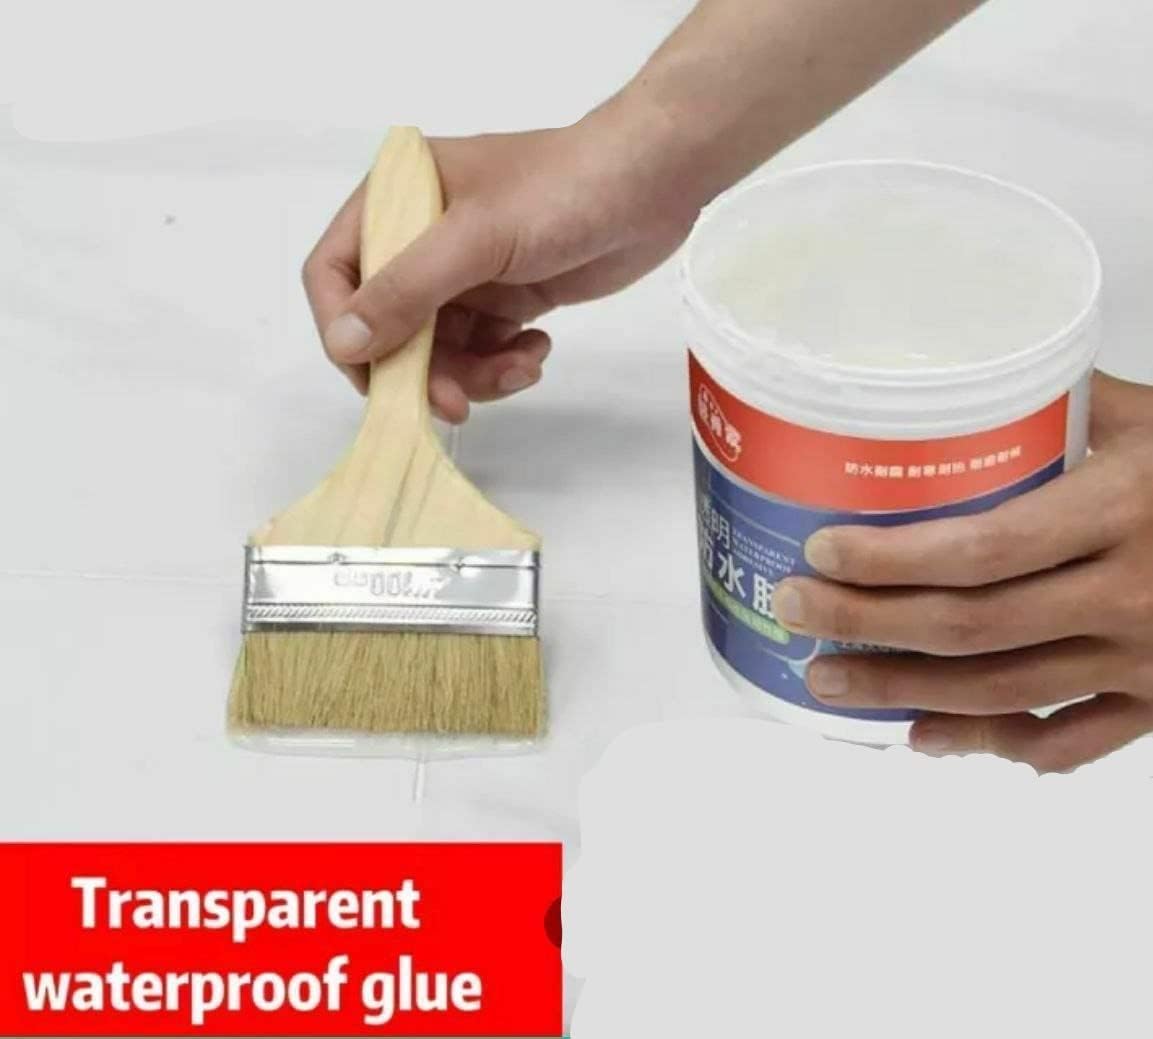 LAST DAY 49% OFF - INVISIBLE WATERPROOF ANTI-LEAKAGE AGENT